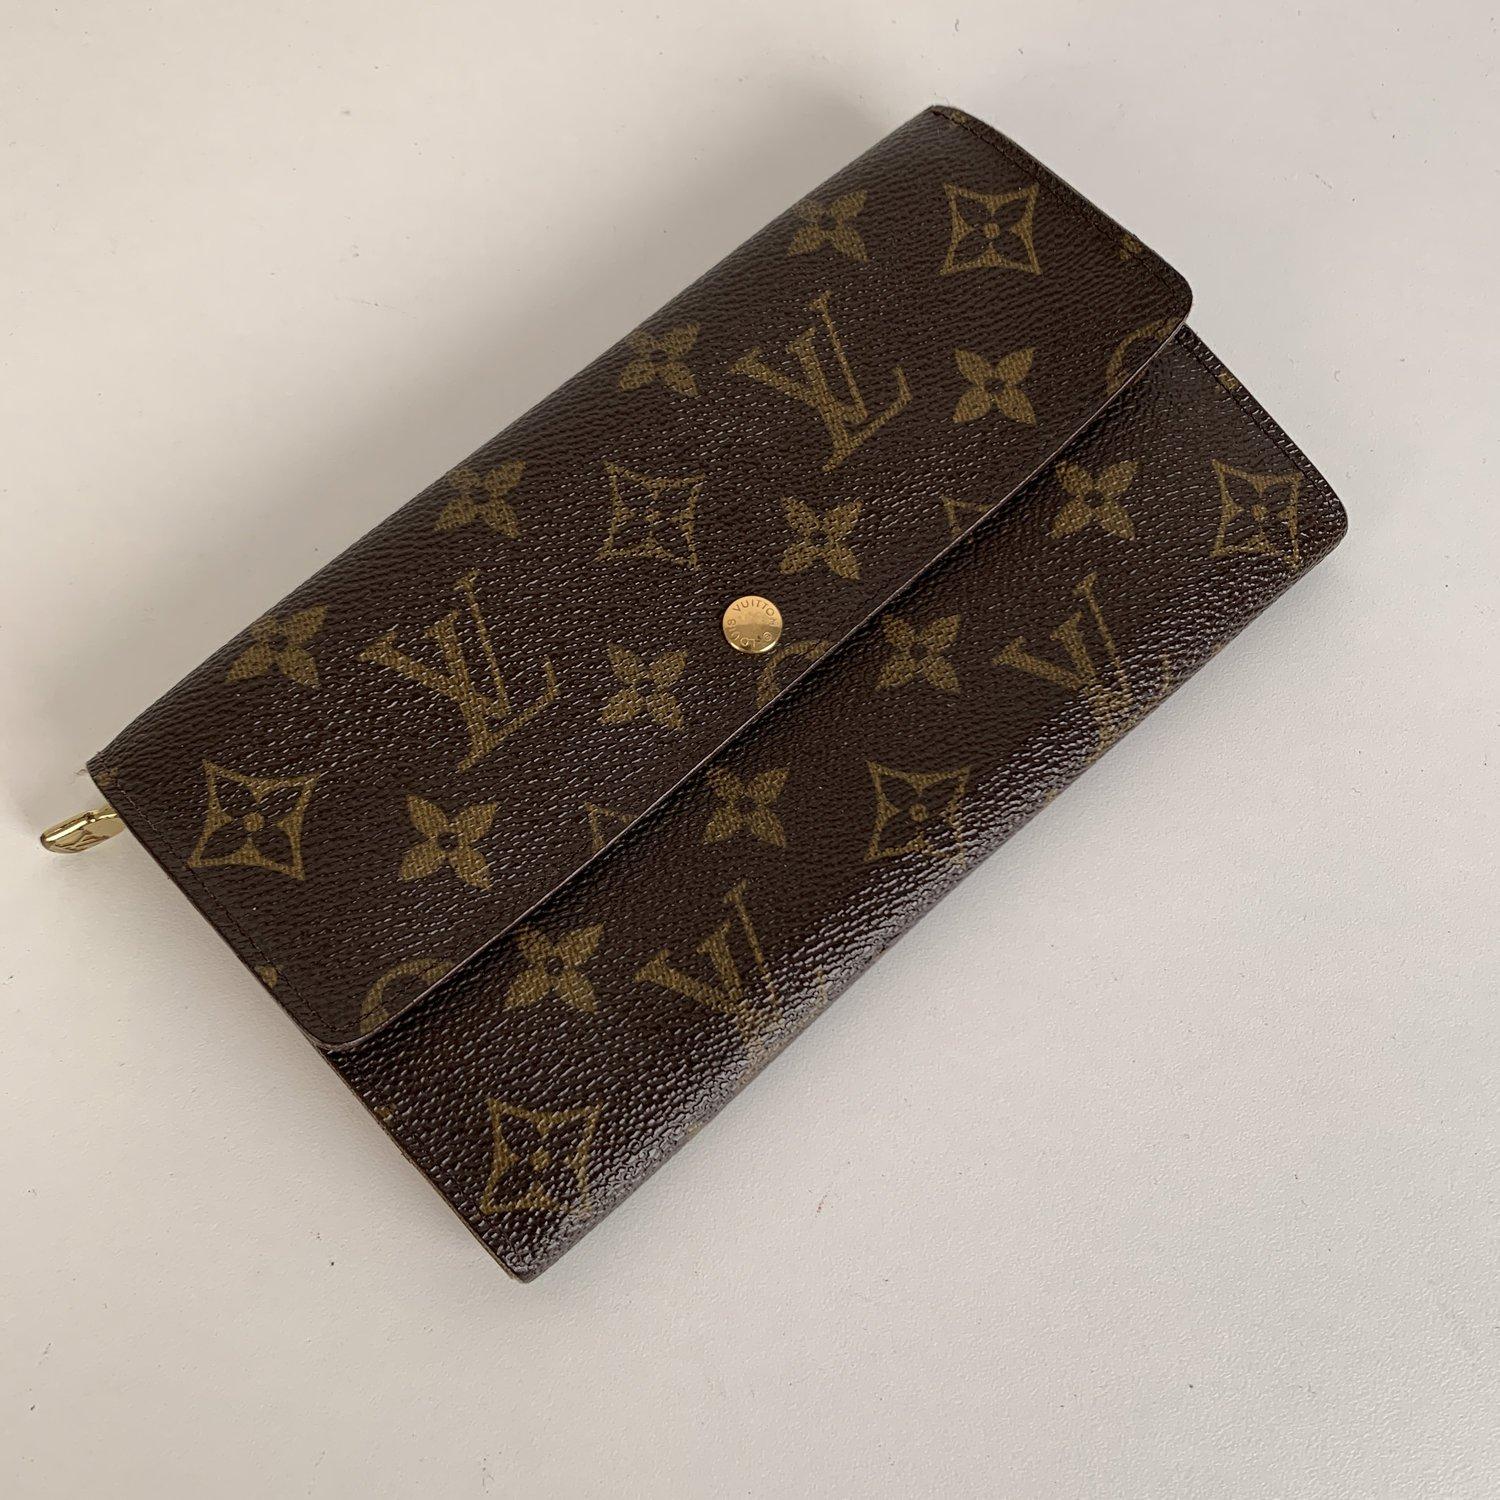 Louis Vuitton continental wallet. Mod. SARAH, crafted in timeless monogram canvas, Flap with button closure. 2 open pockets on the front, under the flap. 3 main sections (middle one with zipper closure). 